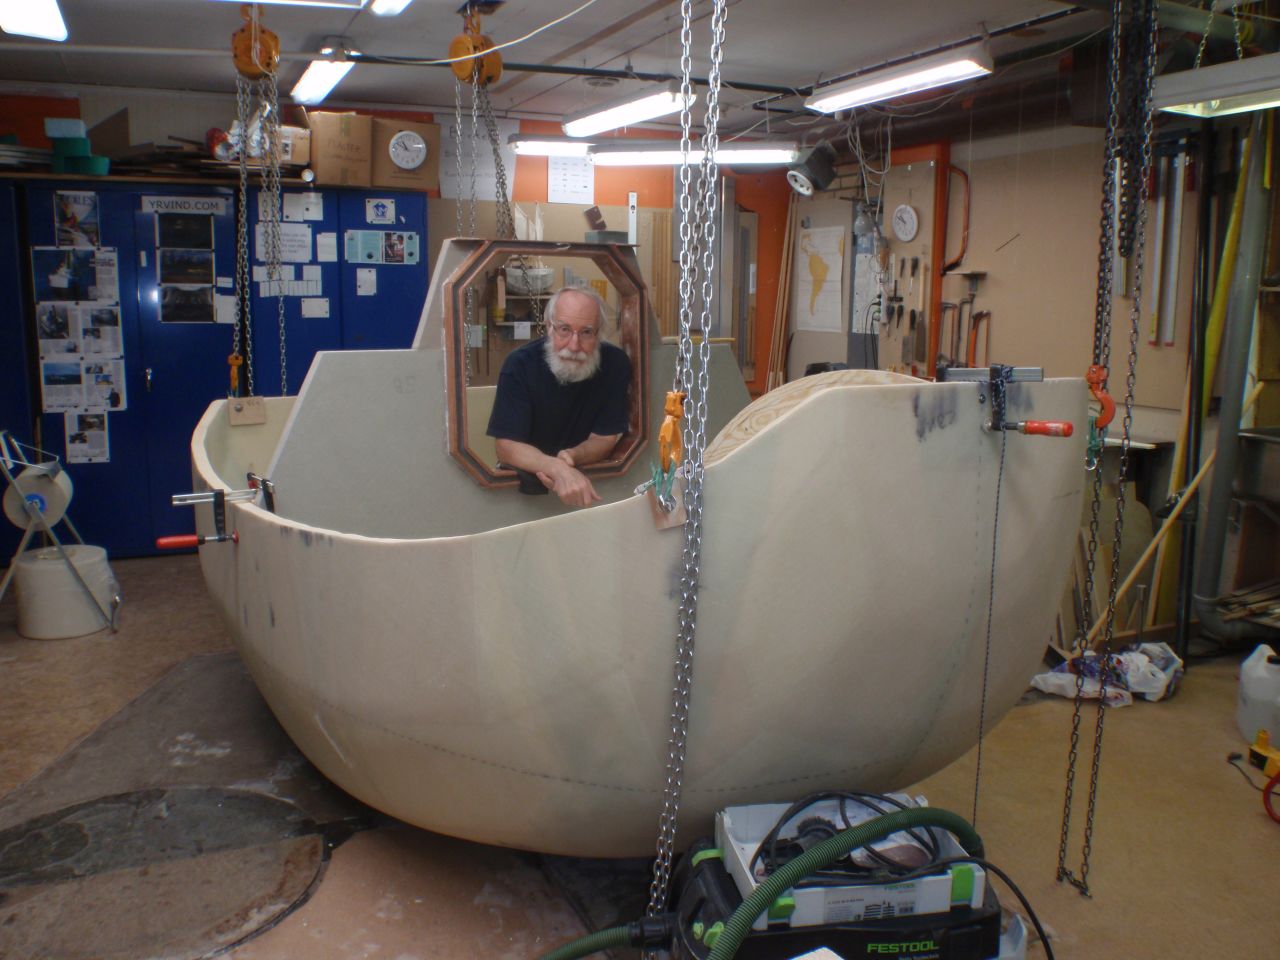 Sven Yrvind with his half-constructed vessel, Yrvind Ten. The 73-year-old plans to sail the three meter boat around the world.